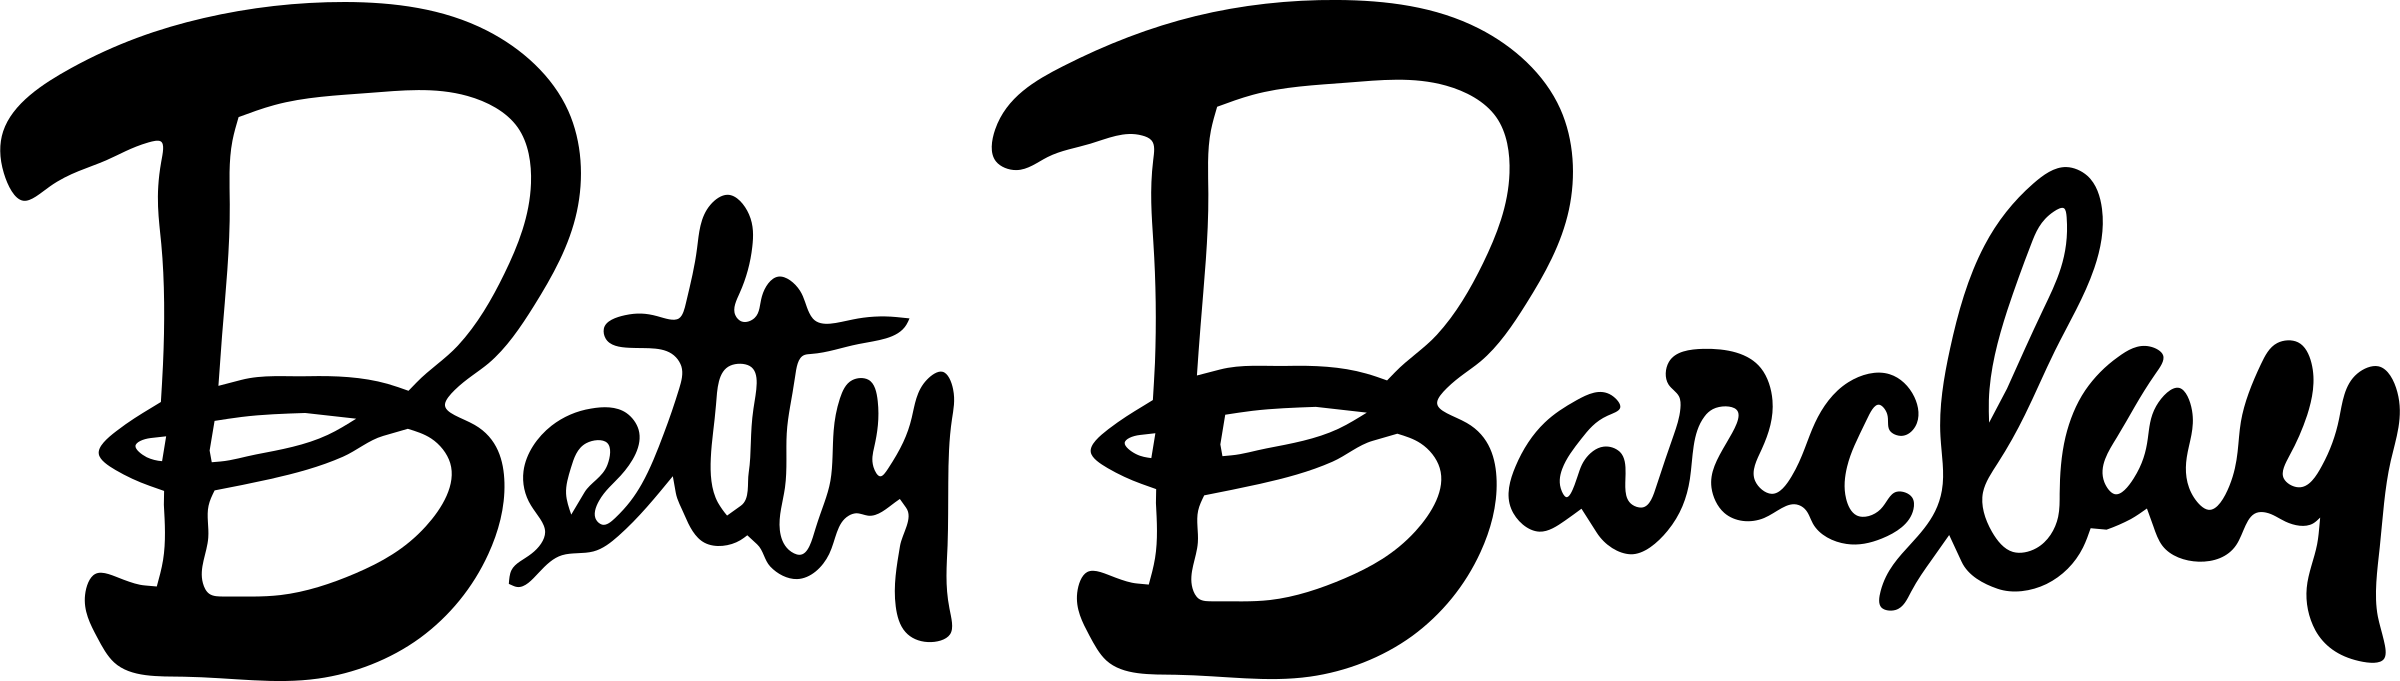 betty-barclay-2-logo-png-transparent